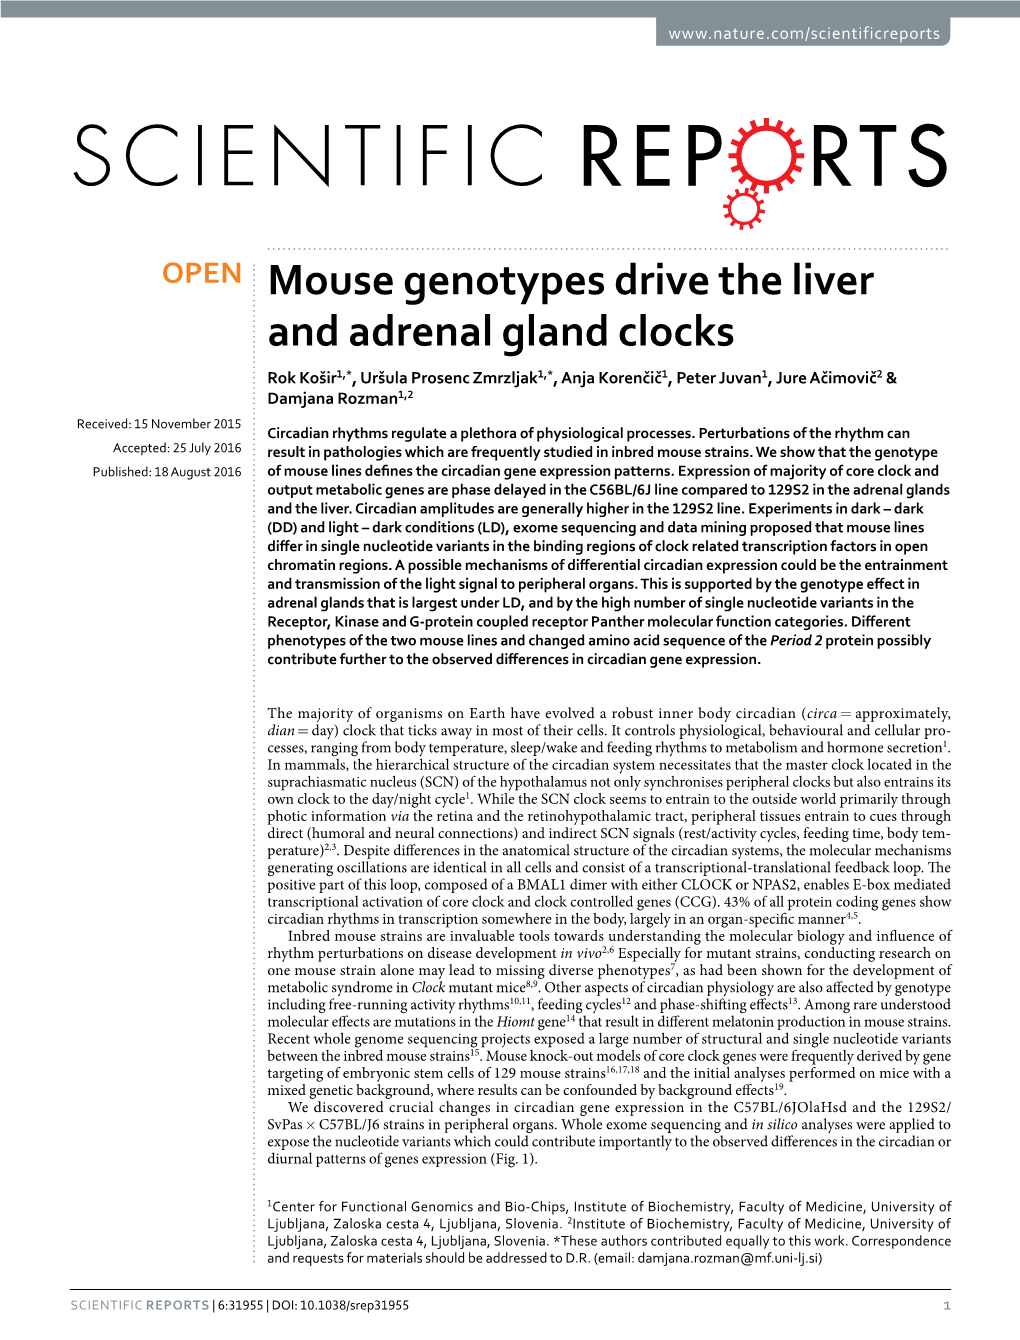 Mouse Genotypes Drive the Liver and Adrenal Gland Clocks